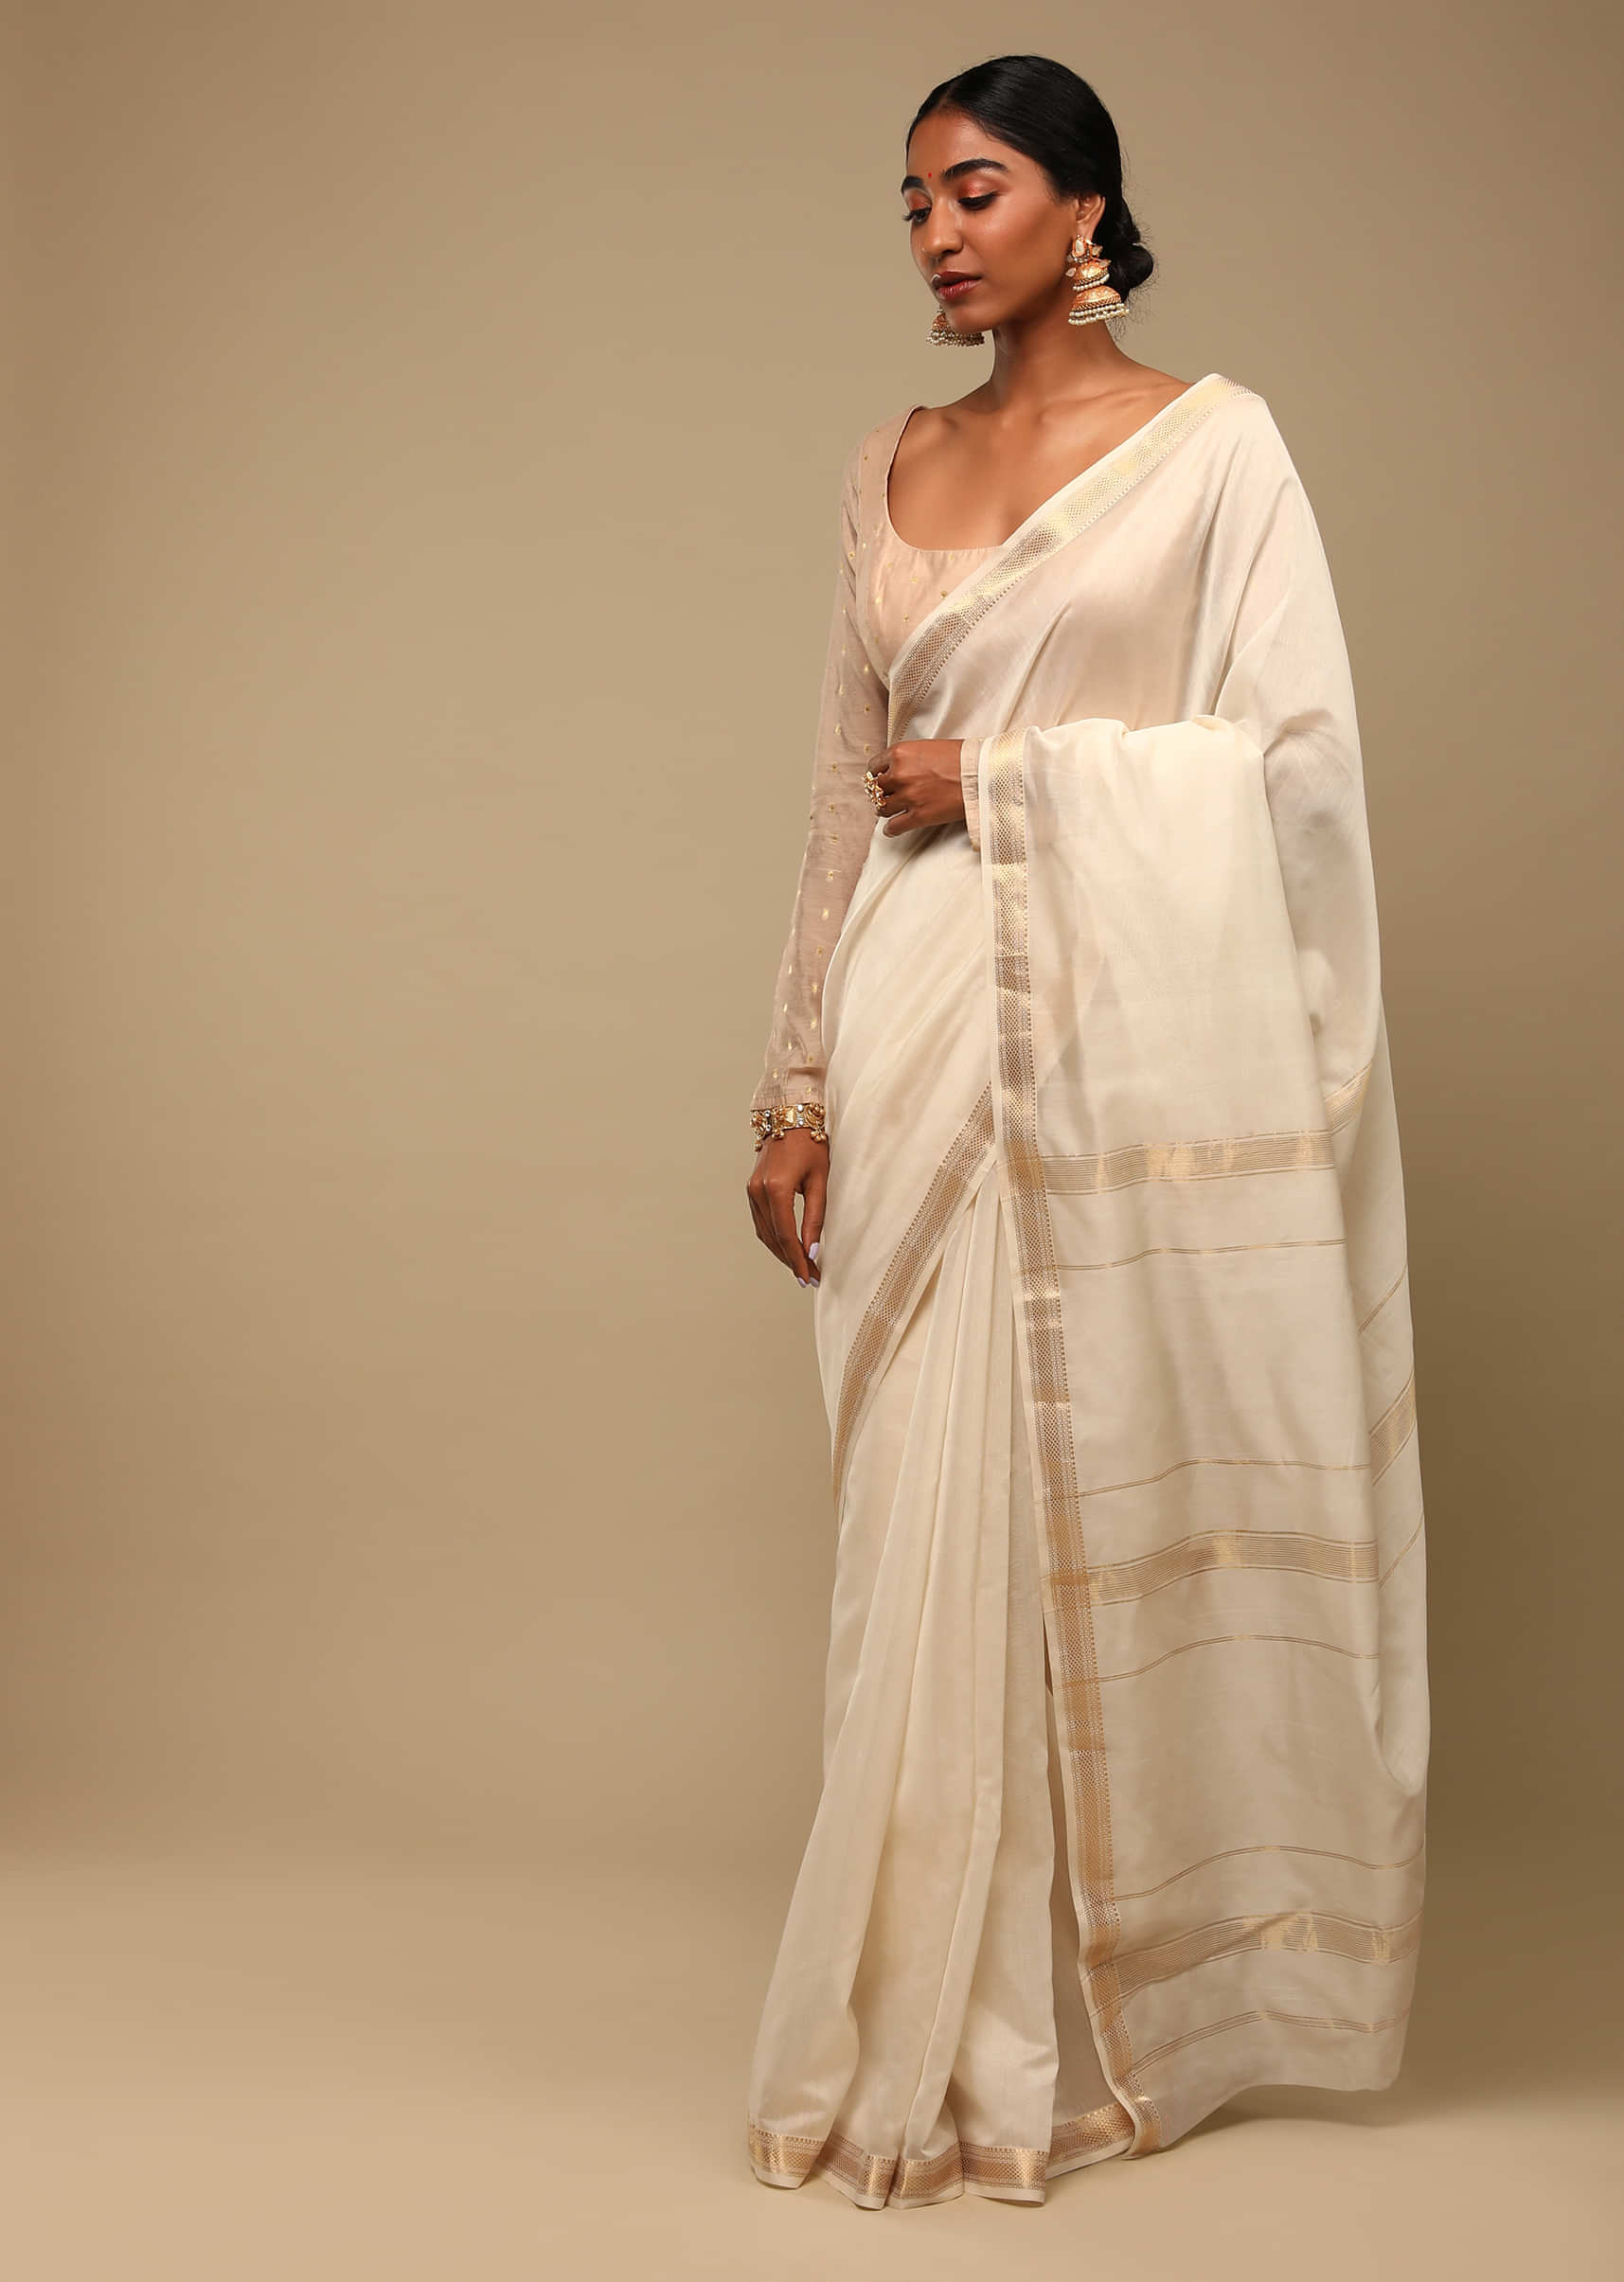 Buy Off White Color Sarees Online at Indian Cloth Store